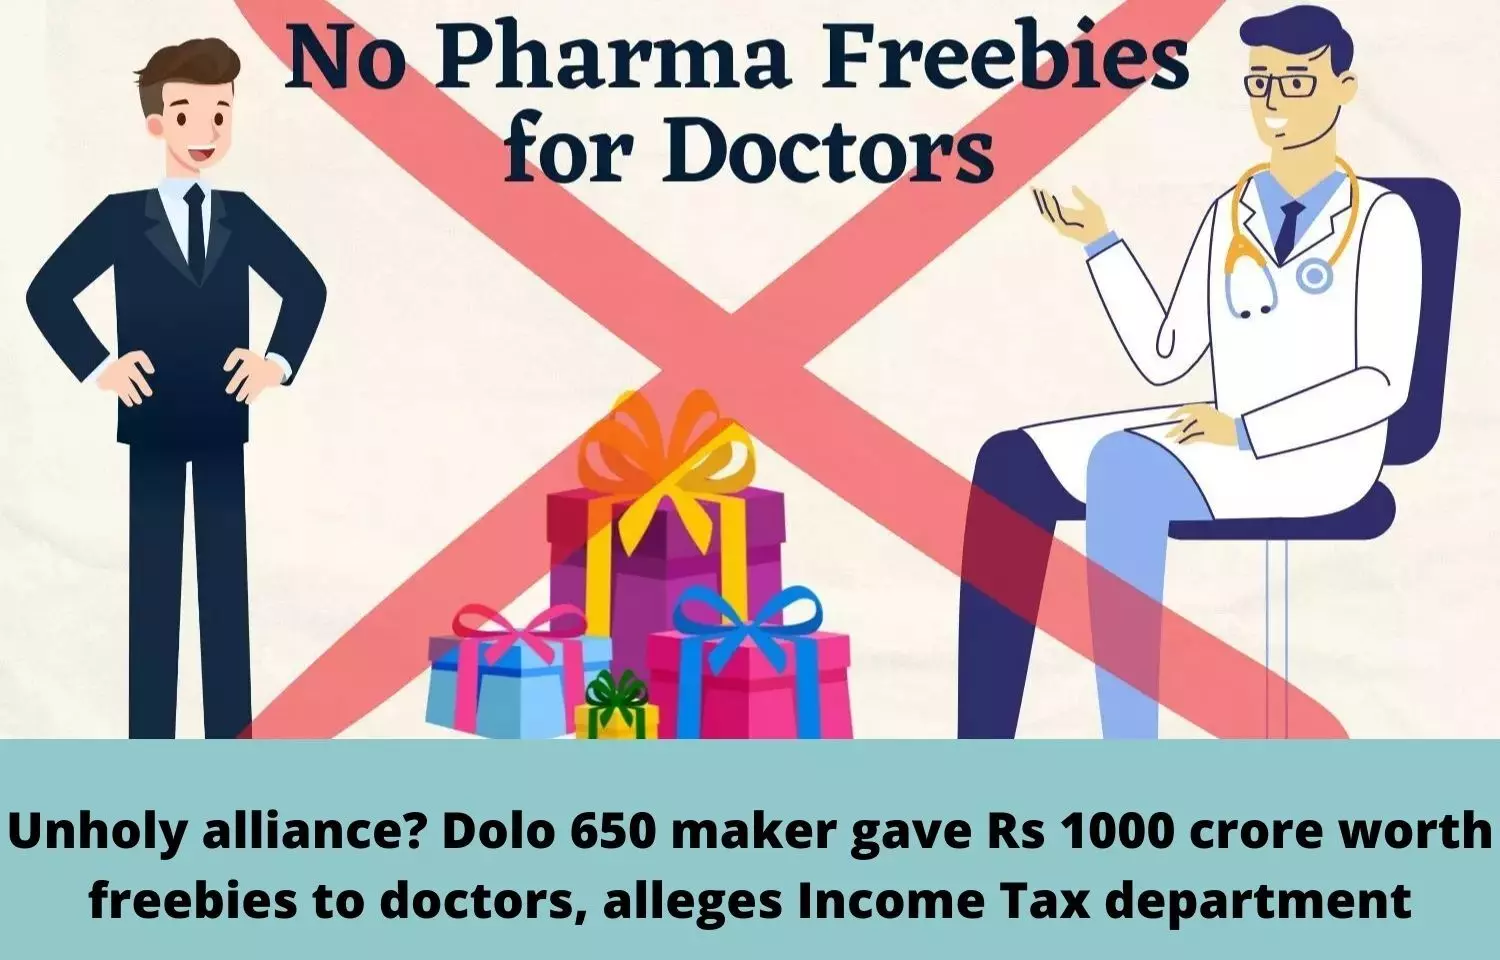 Unholy alliance? Dolo 650 maker gave Rs 1000 crore worth freebies to doctors, alleges Income Tax department